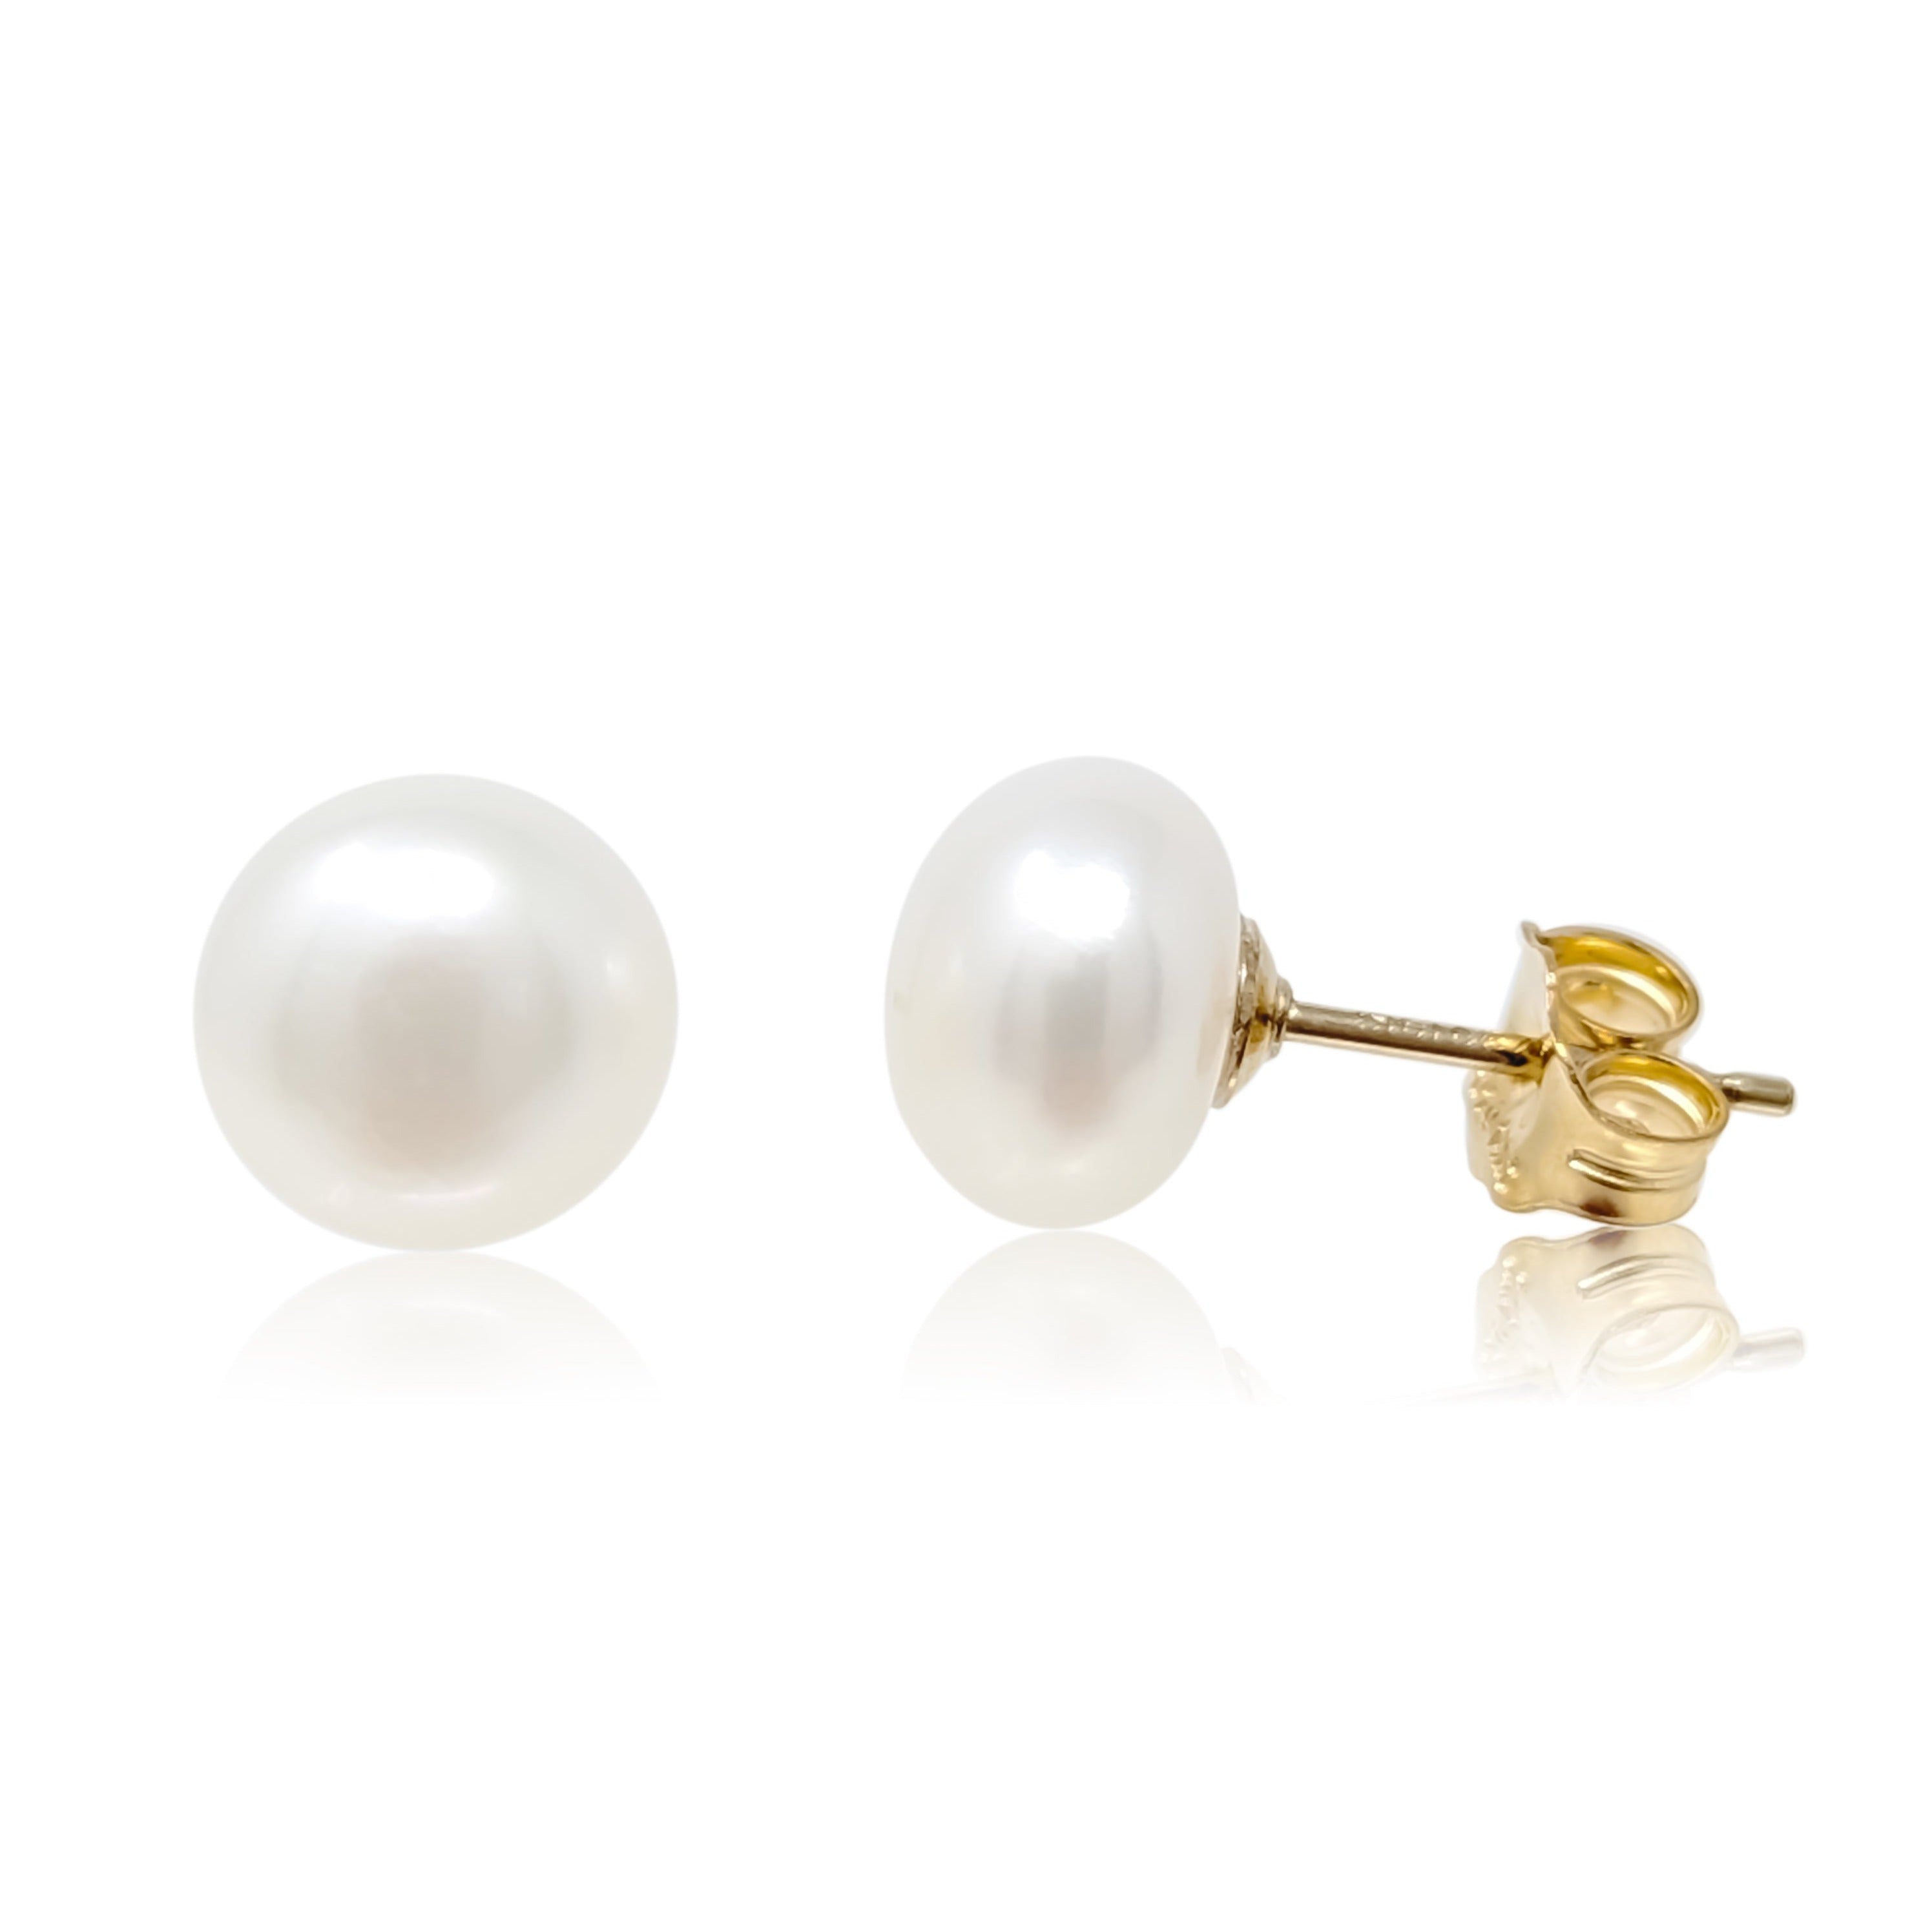 Gold filled Mae stud earrings on white background